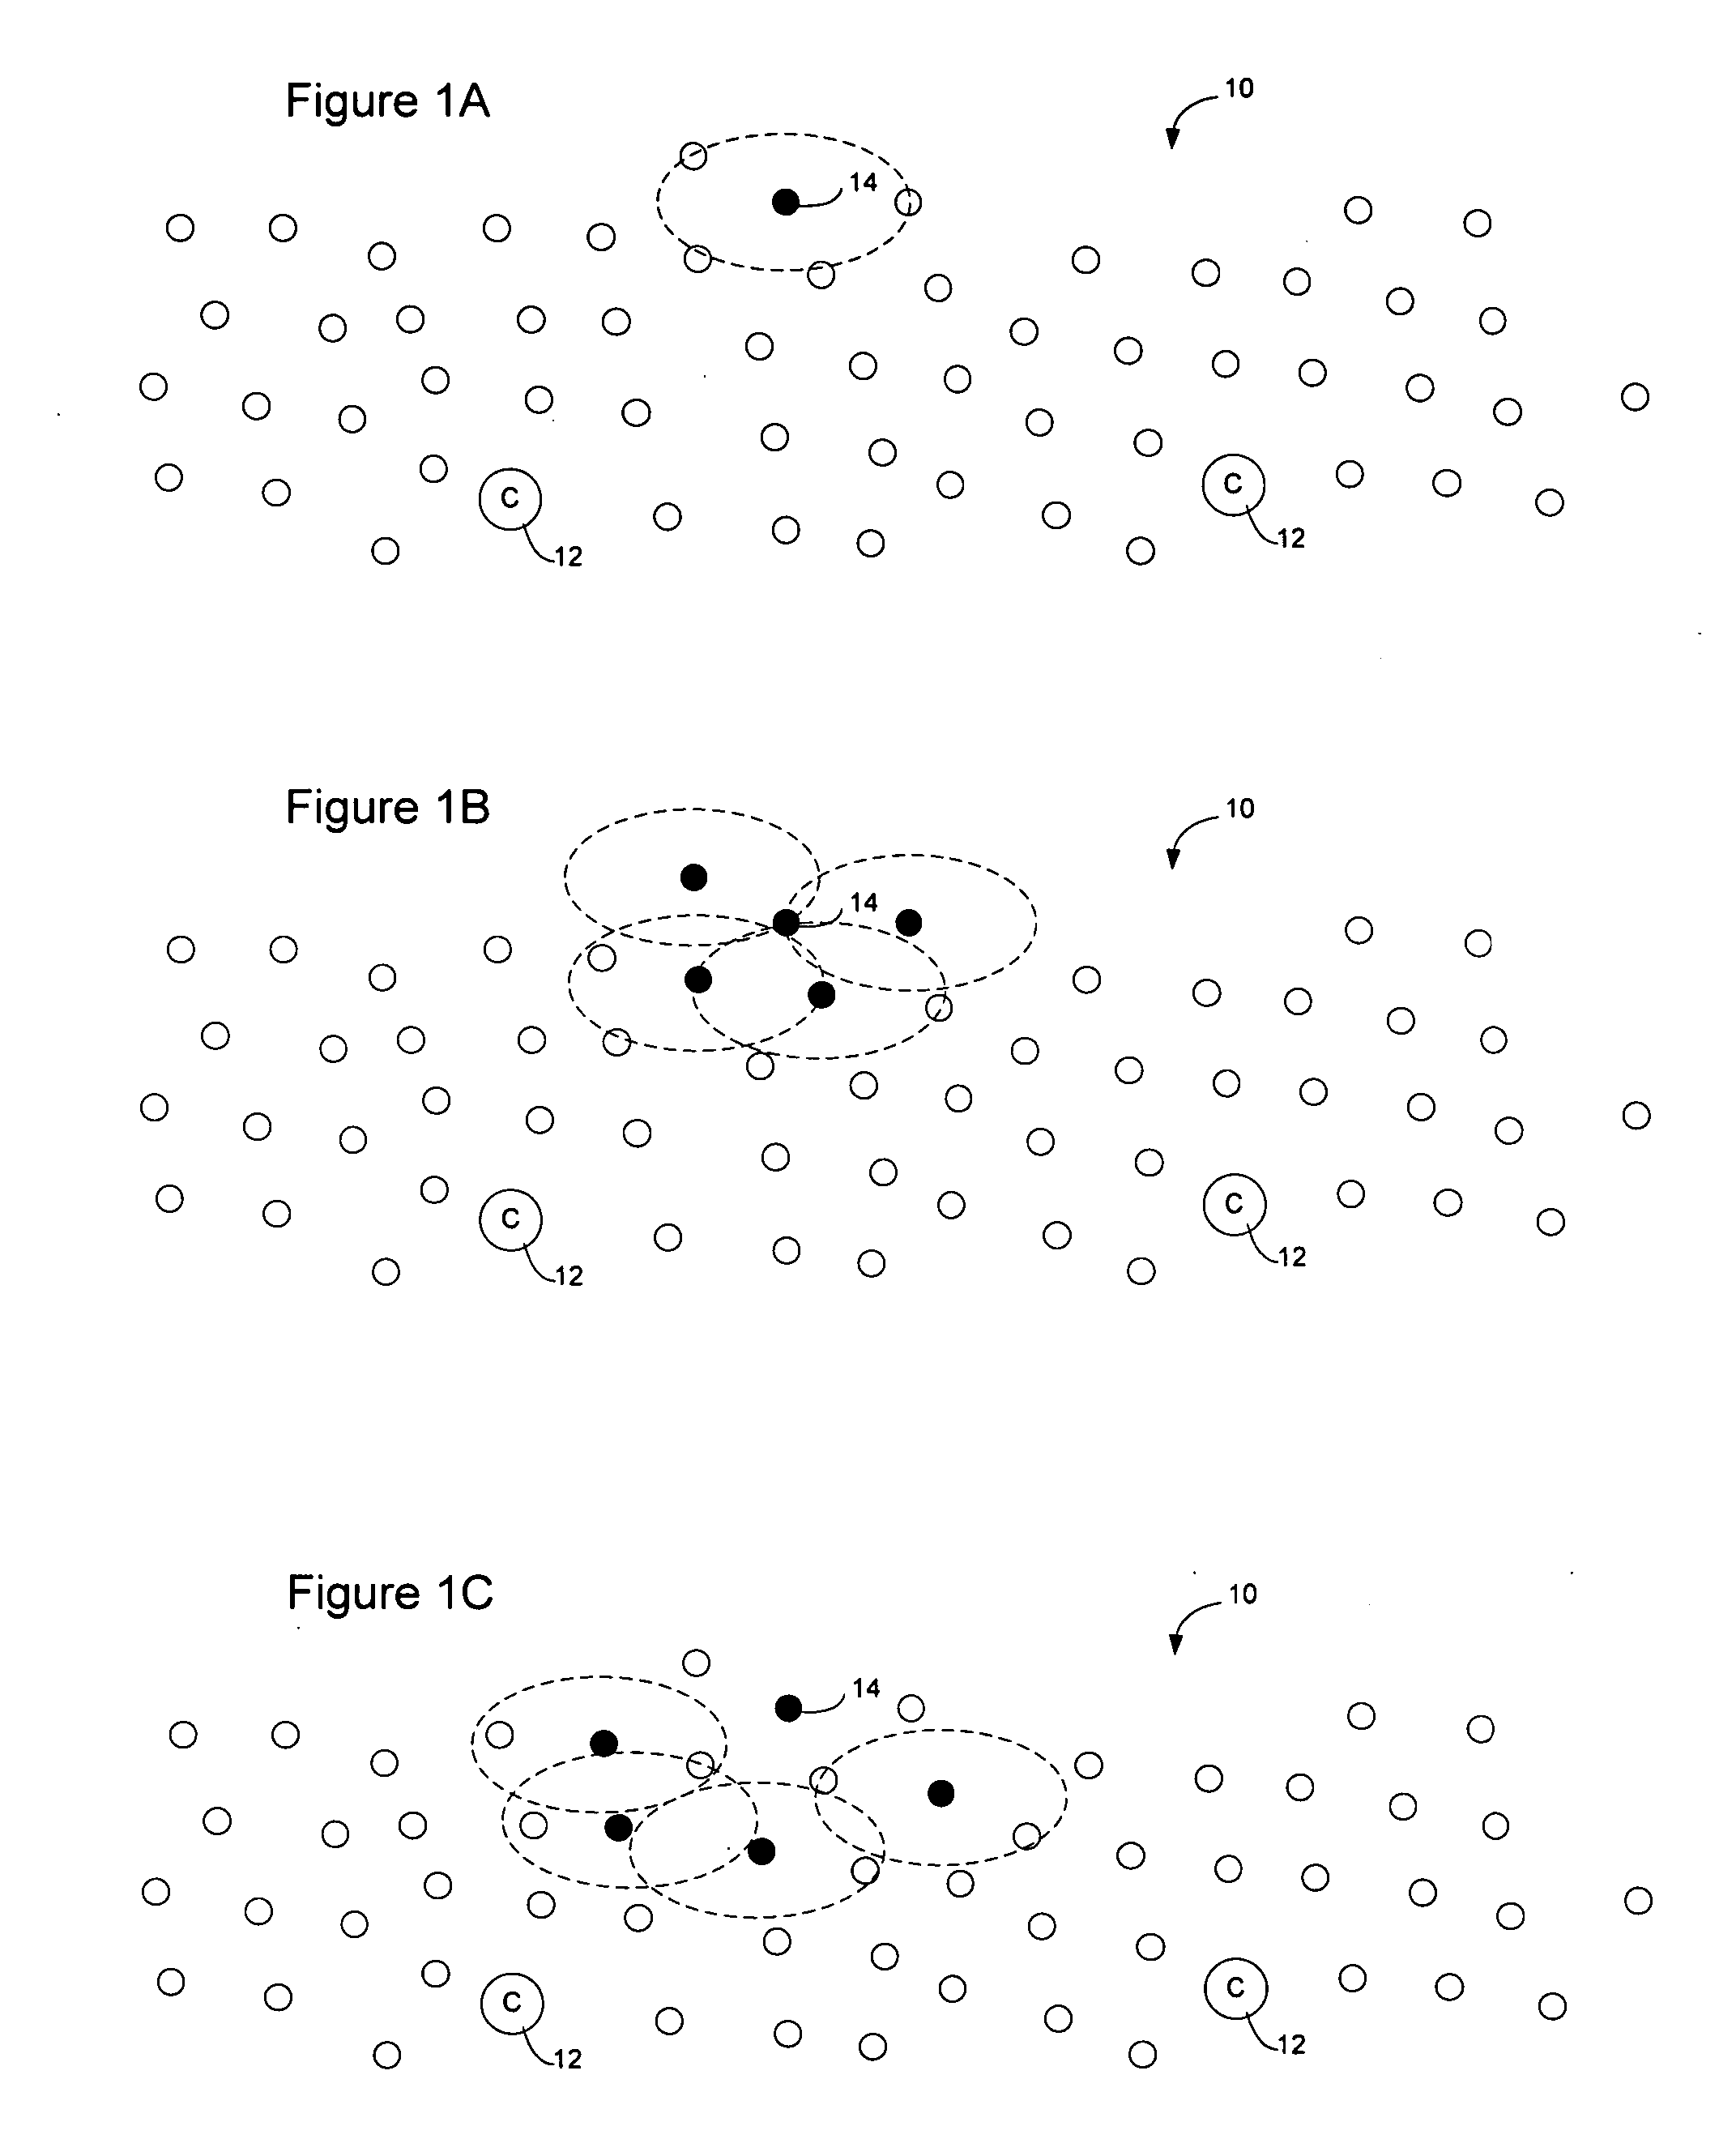 Method and apparatus for sensor network routing